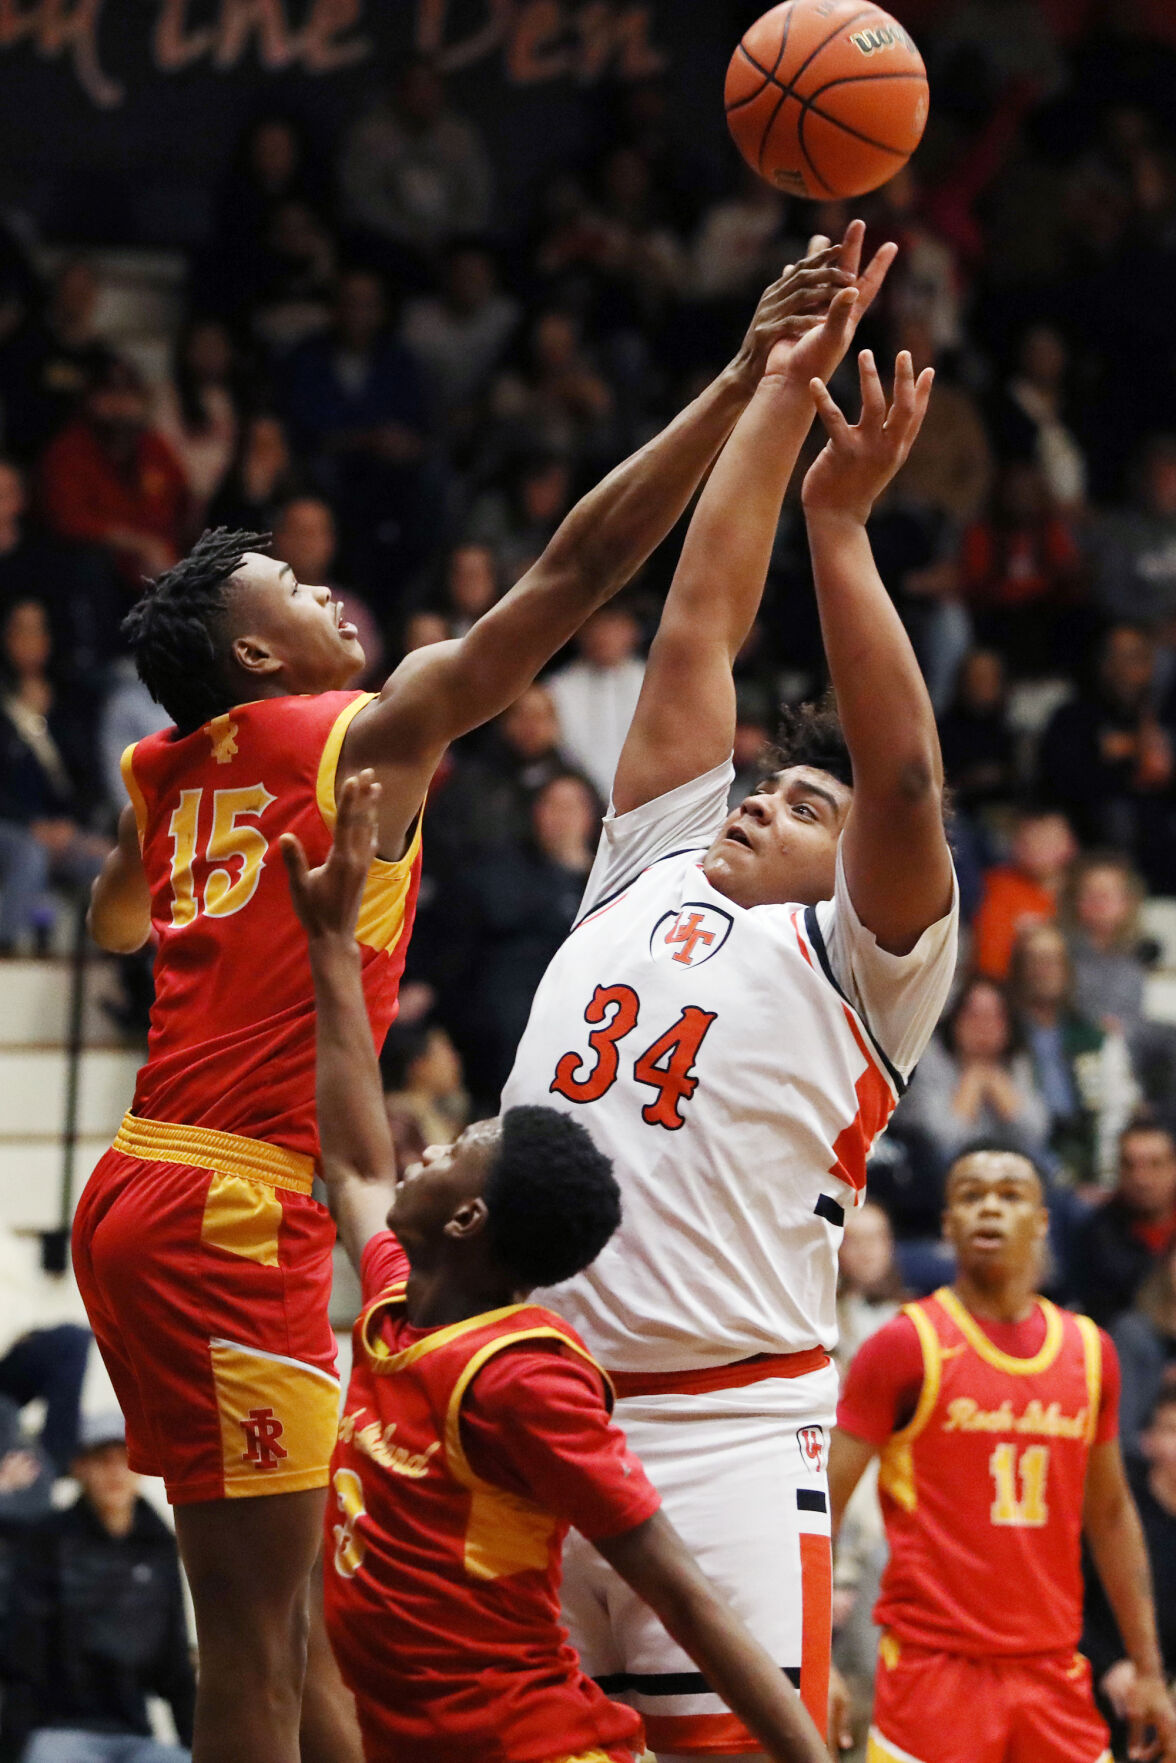 Rock Island High School boys’ basketball team dominates United Township with Coach Marc Polite leading the way